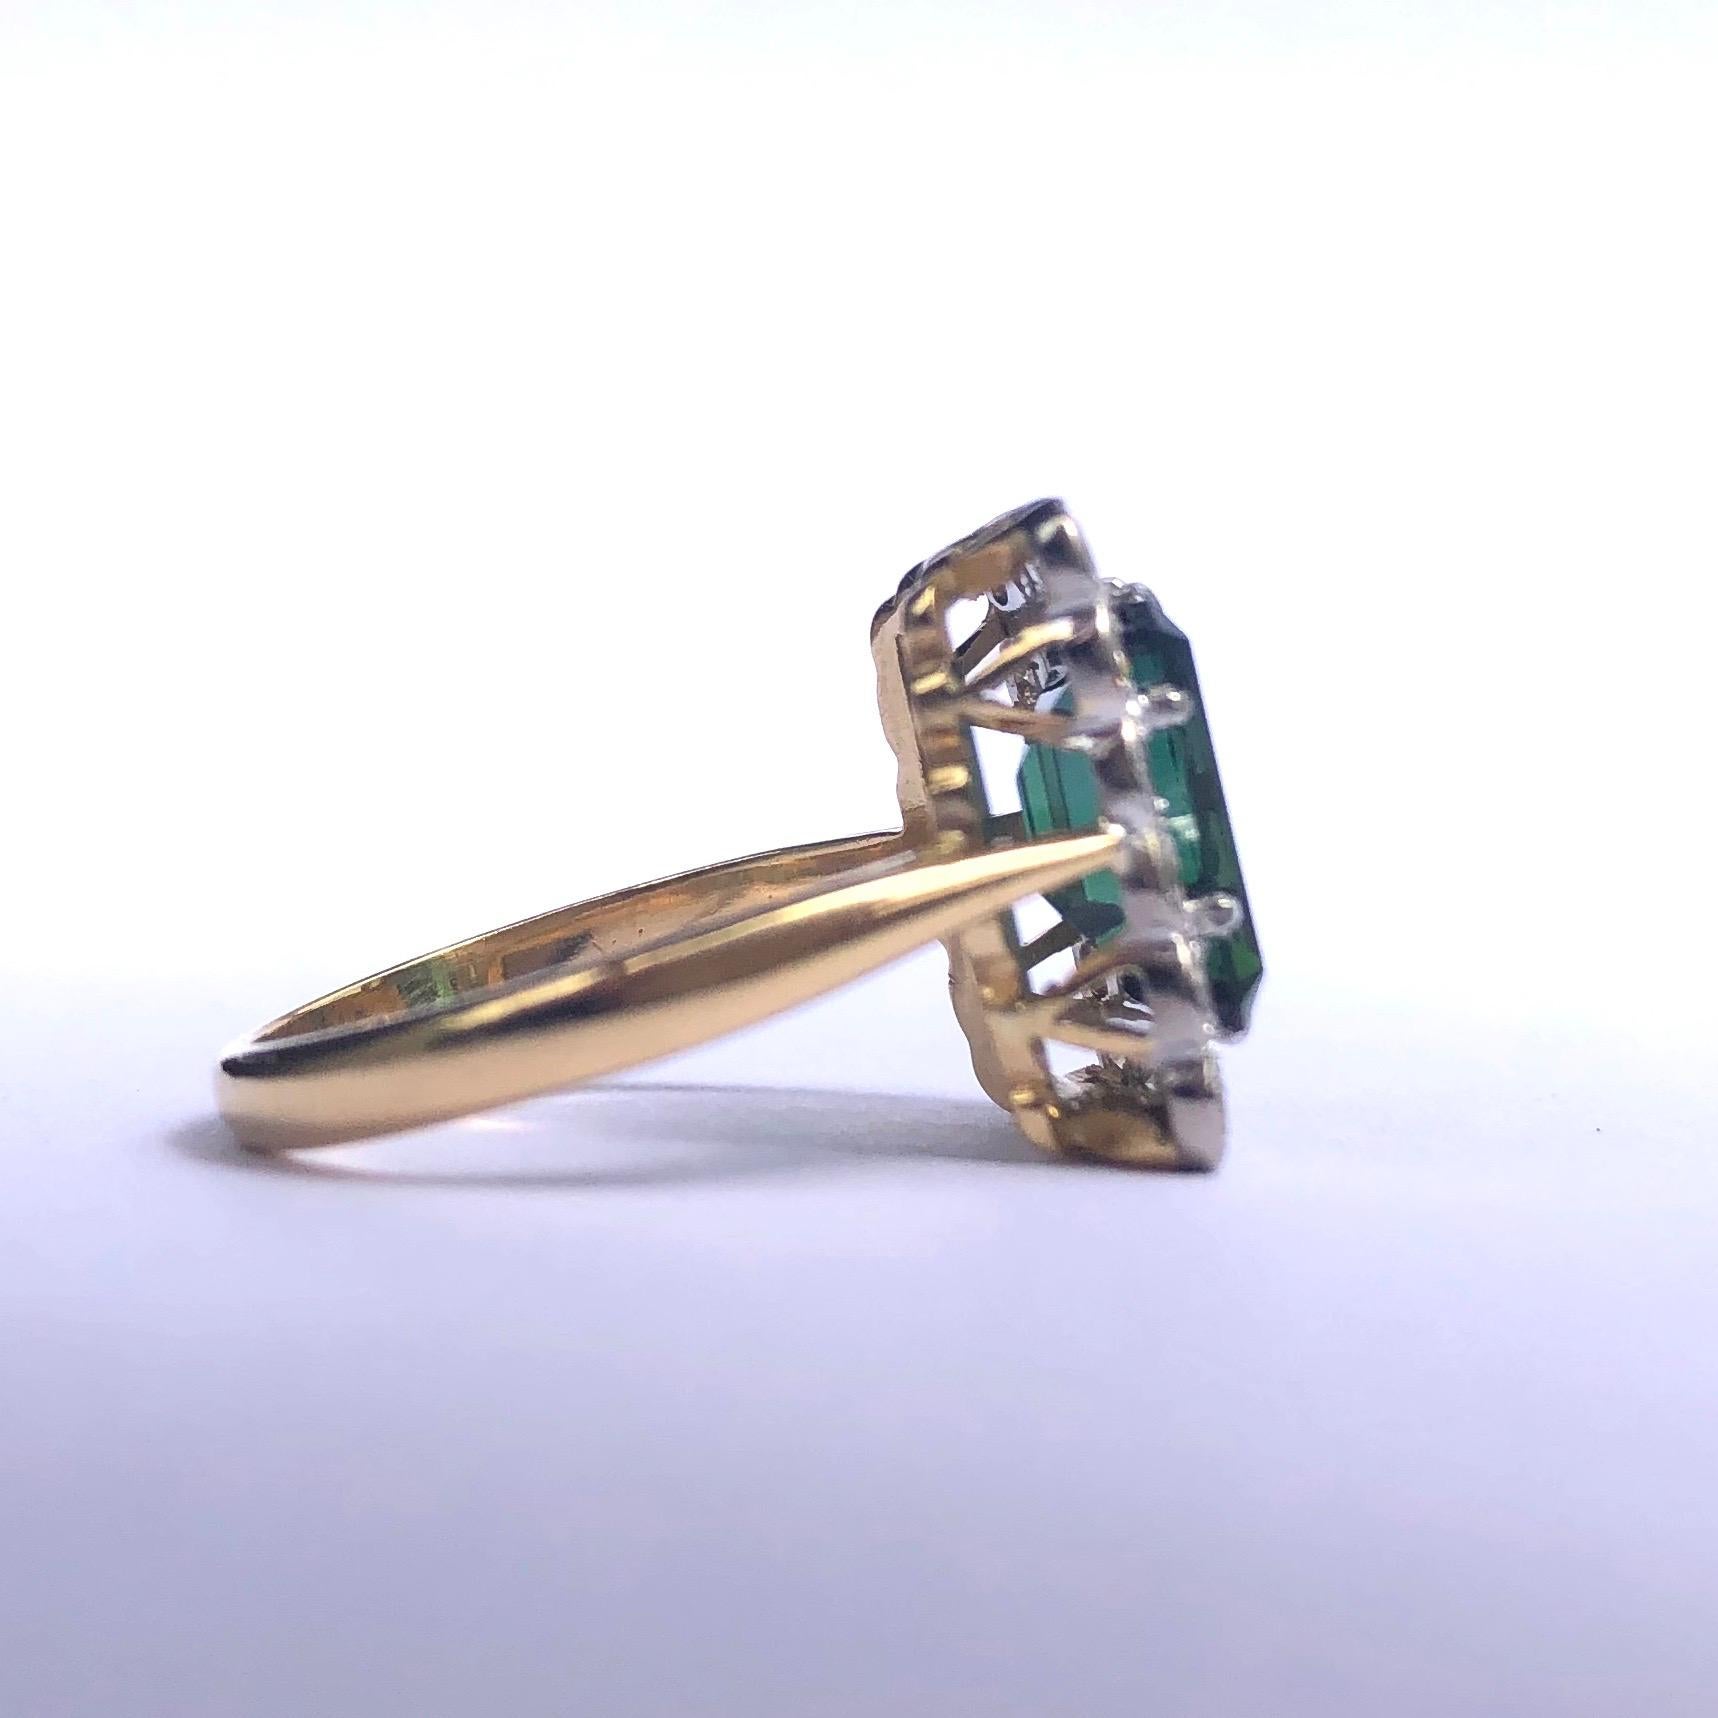 The tourmaline in this ring is a deep delicious green colour and is perfectly complimented by a halo of shimmering, bright white diamonds. The stones are set in platinum and the rest of the ring is modelled in 18ct gold. 

Ring Size: M 1/2 or 6 1/2